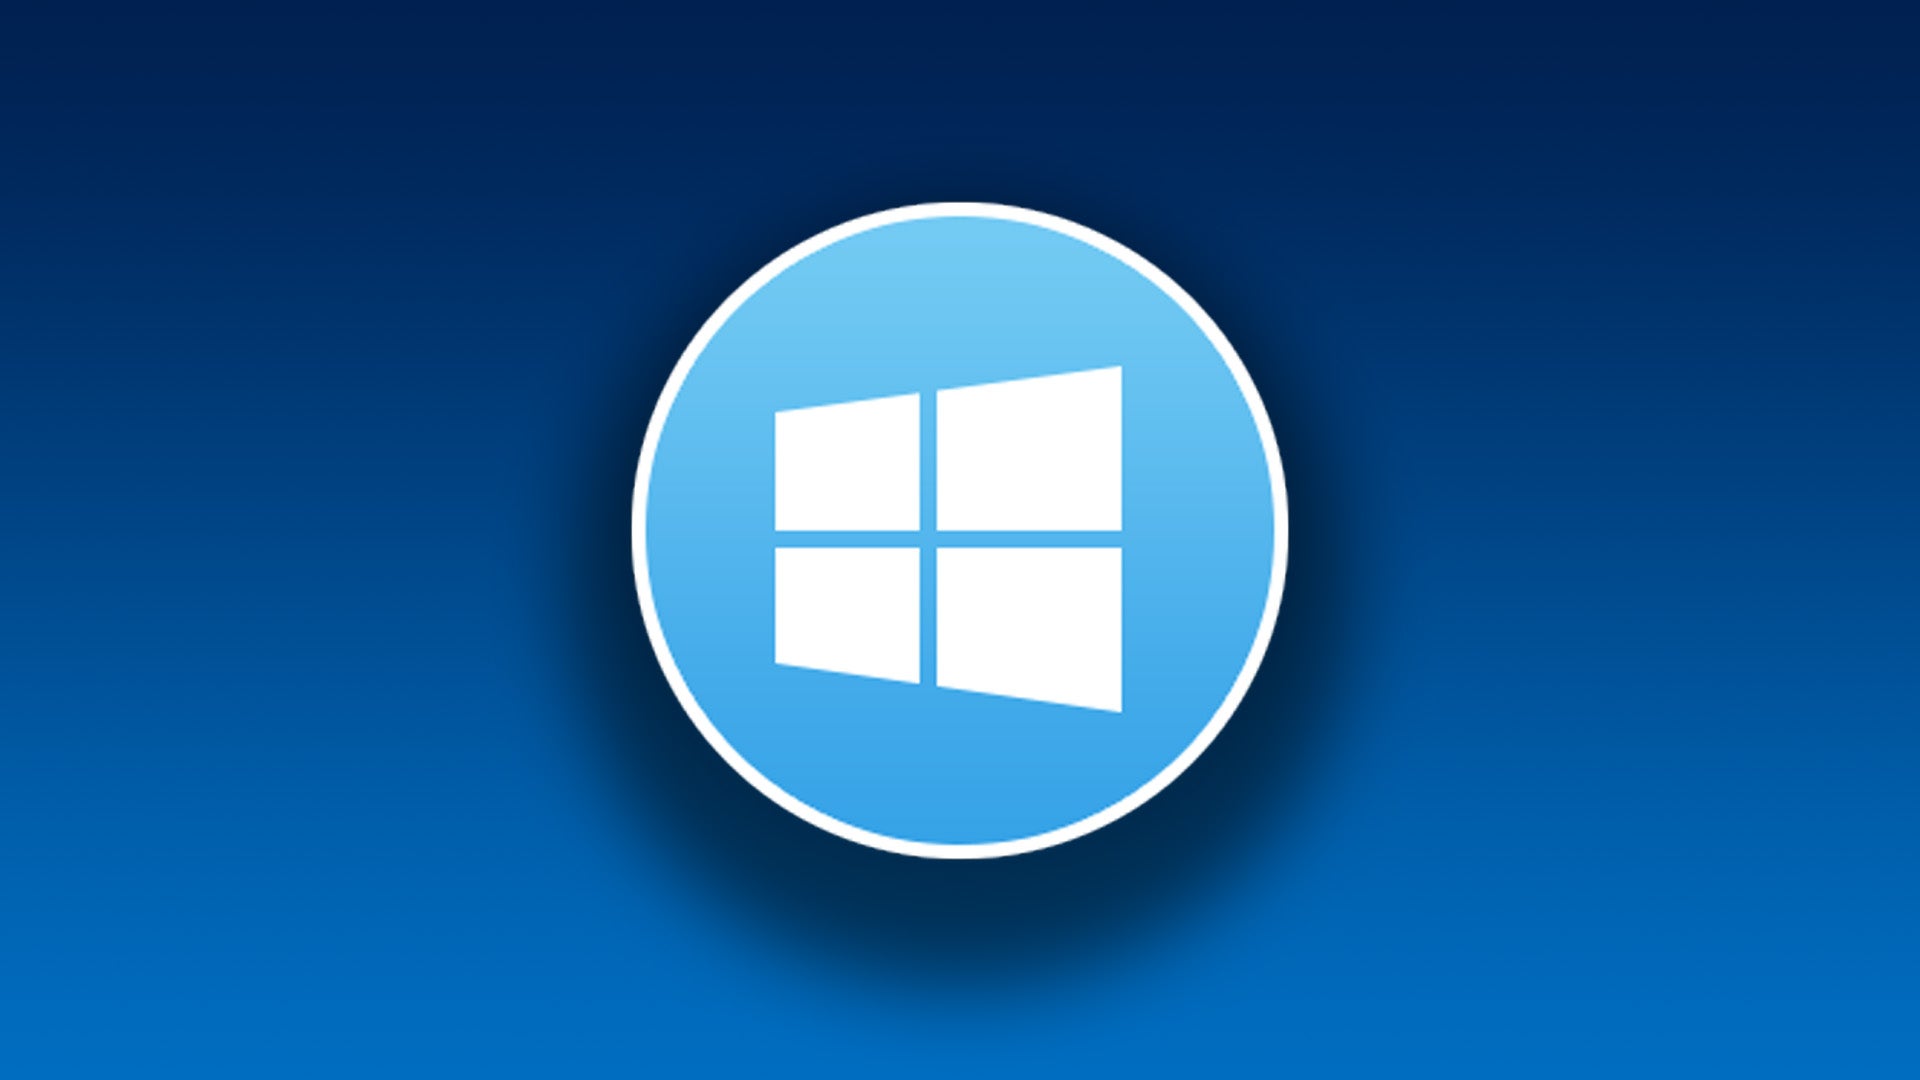 Image for Windows 10 is coming this summer